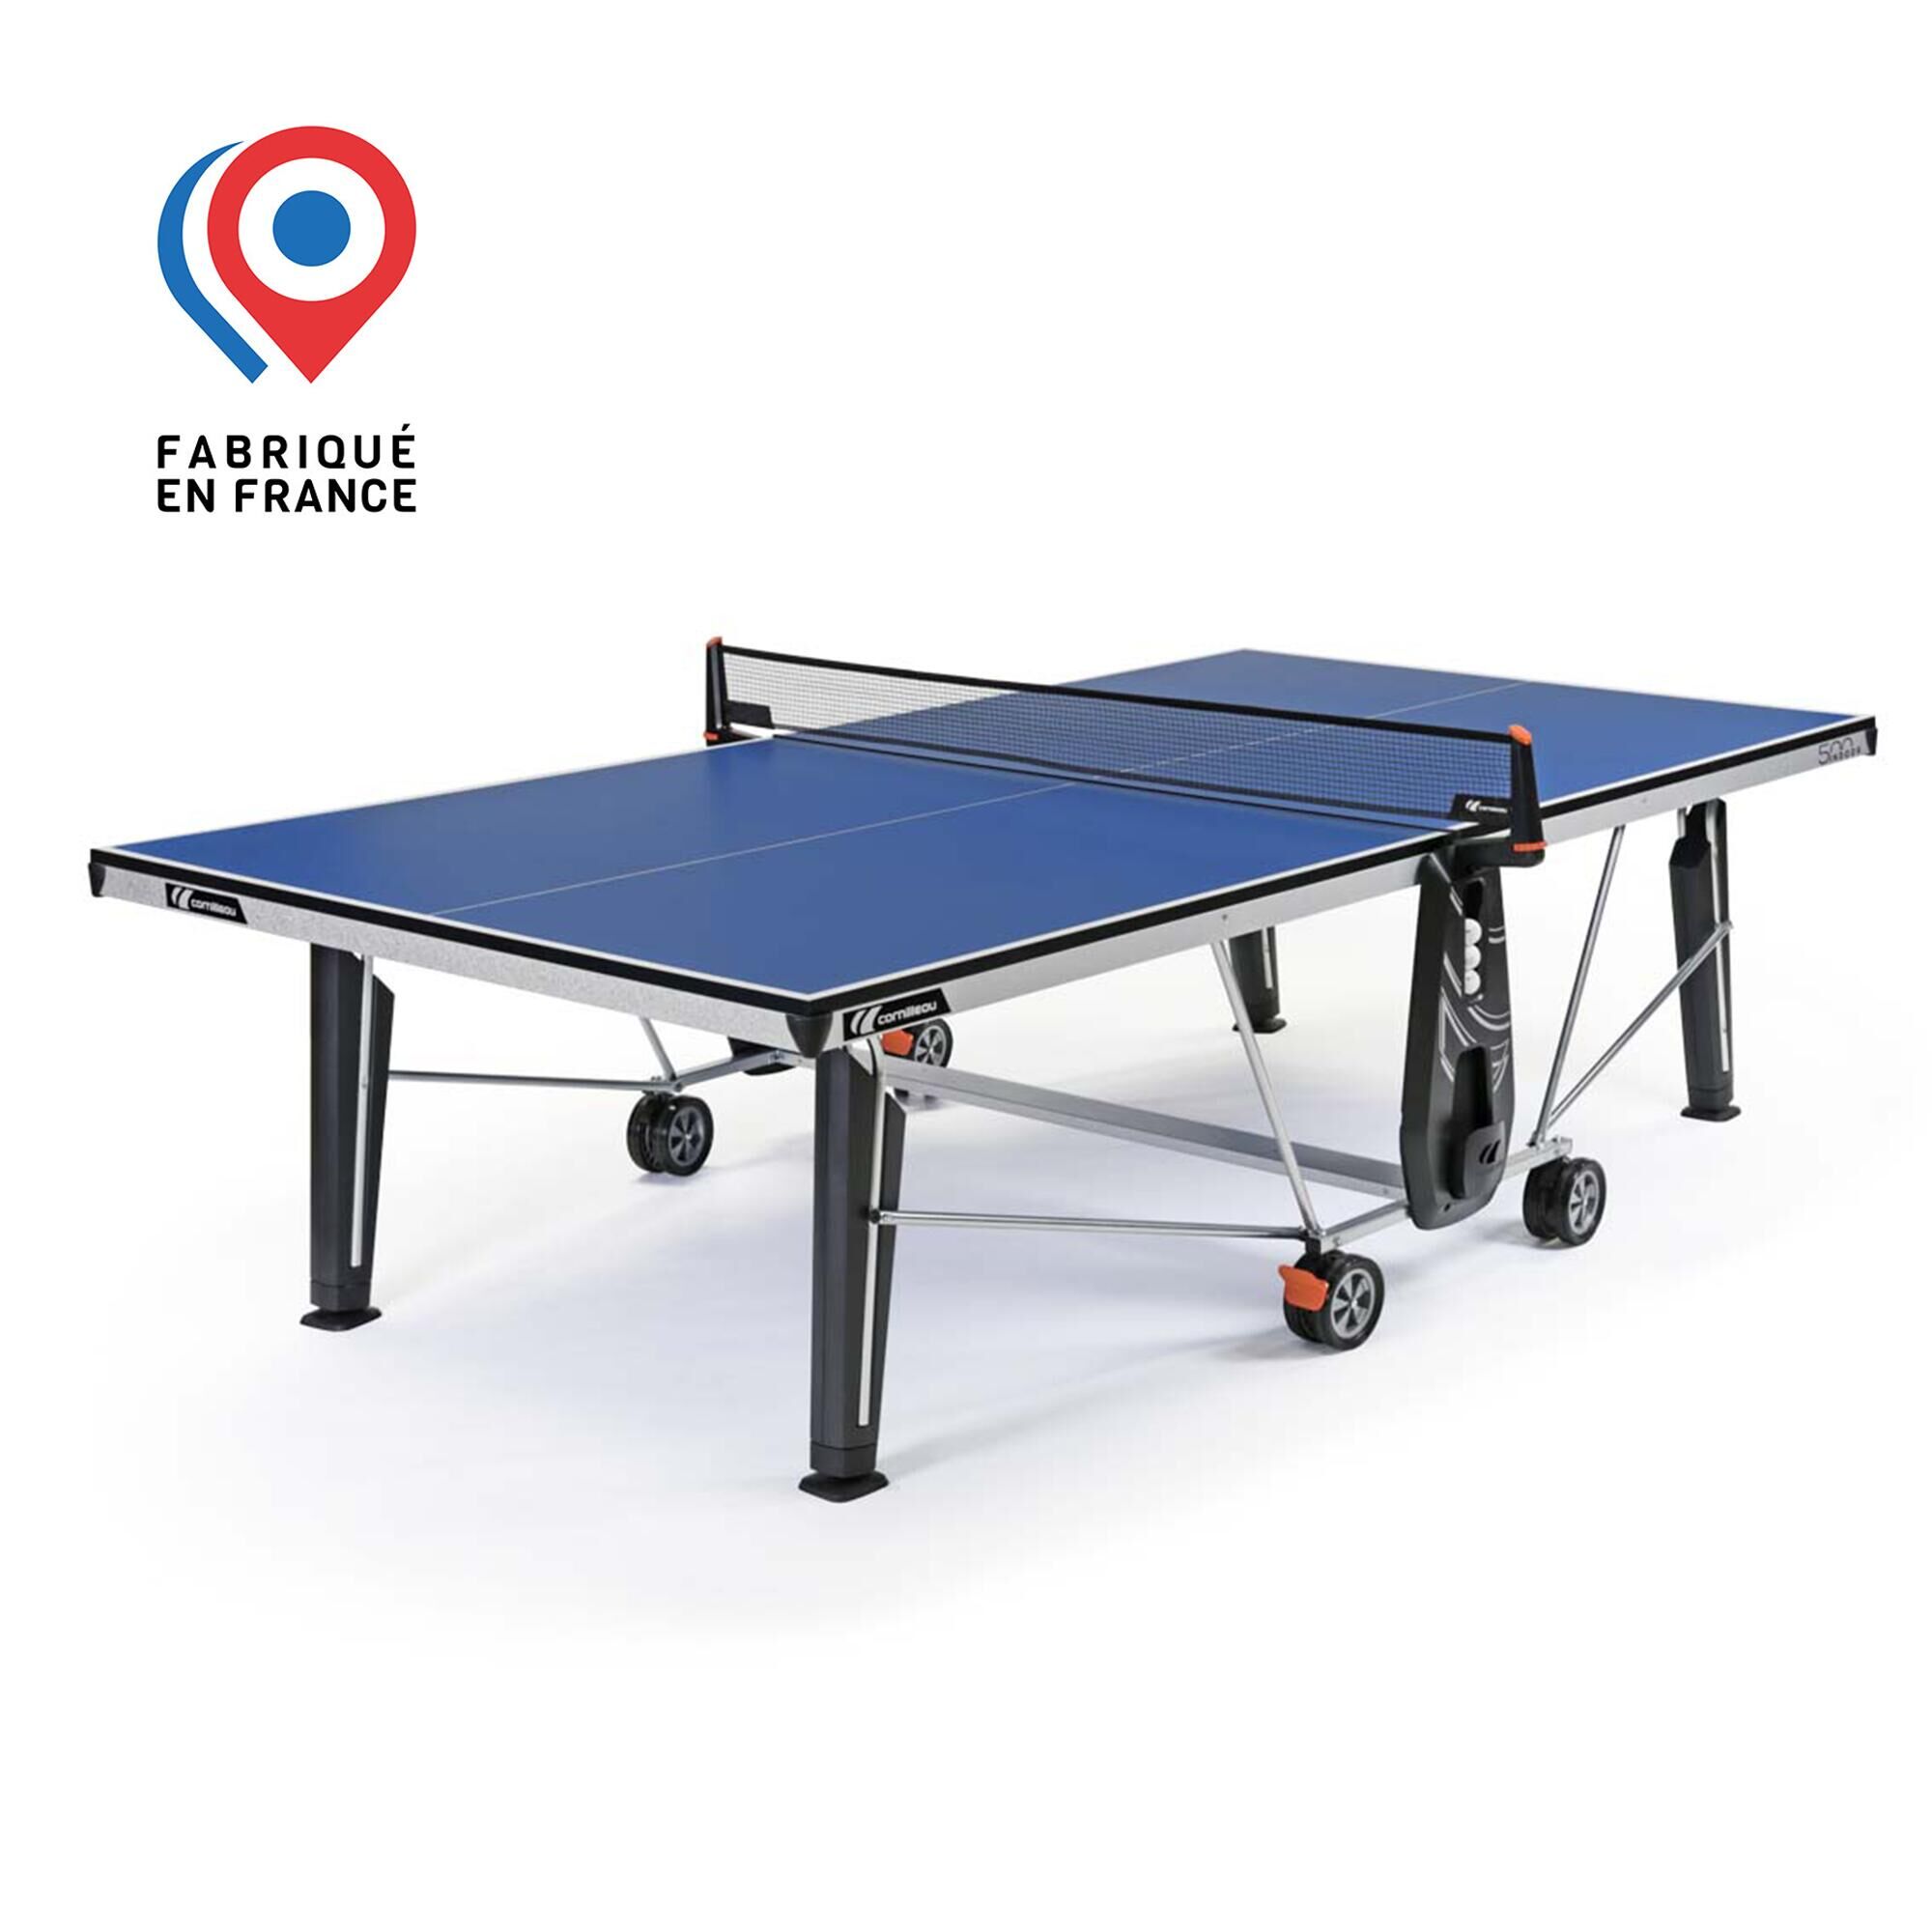 CORNILLEAU NEW 500 Indoor Table Tennis Table - Blue